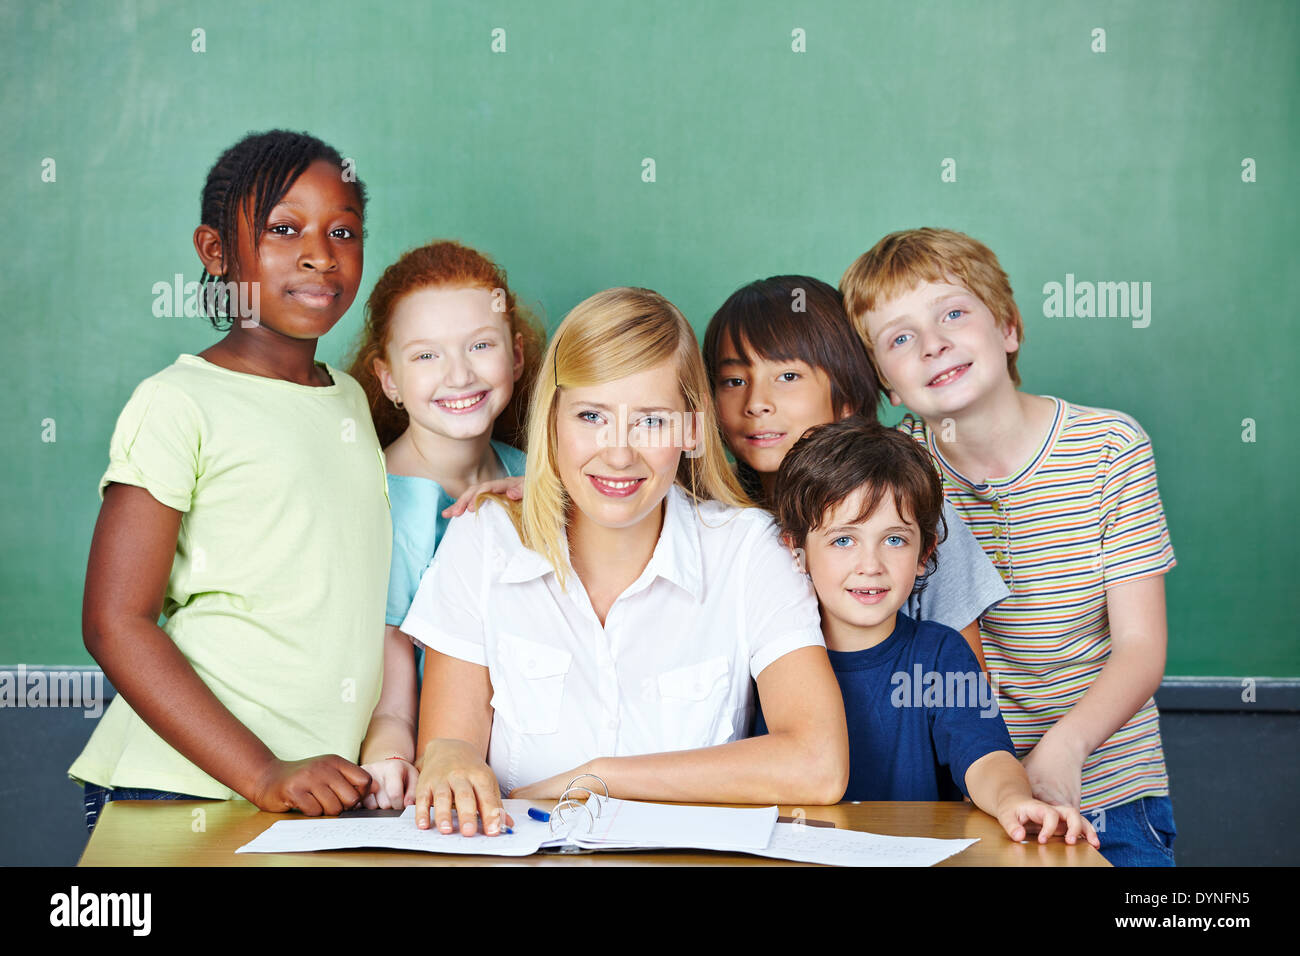 Portrait of happy teacher with group of students in front of chalkboard Stock Photo